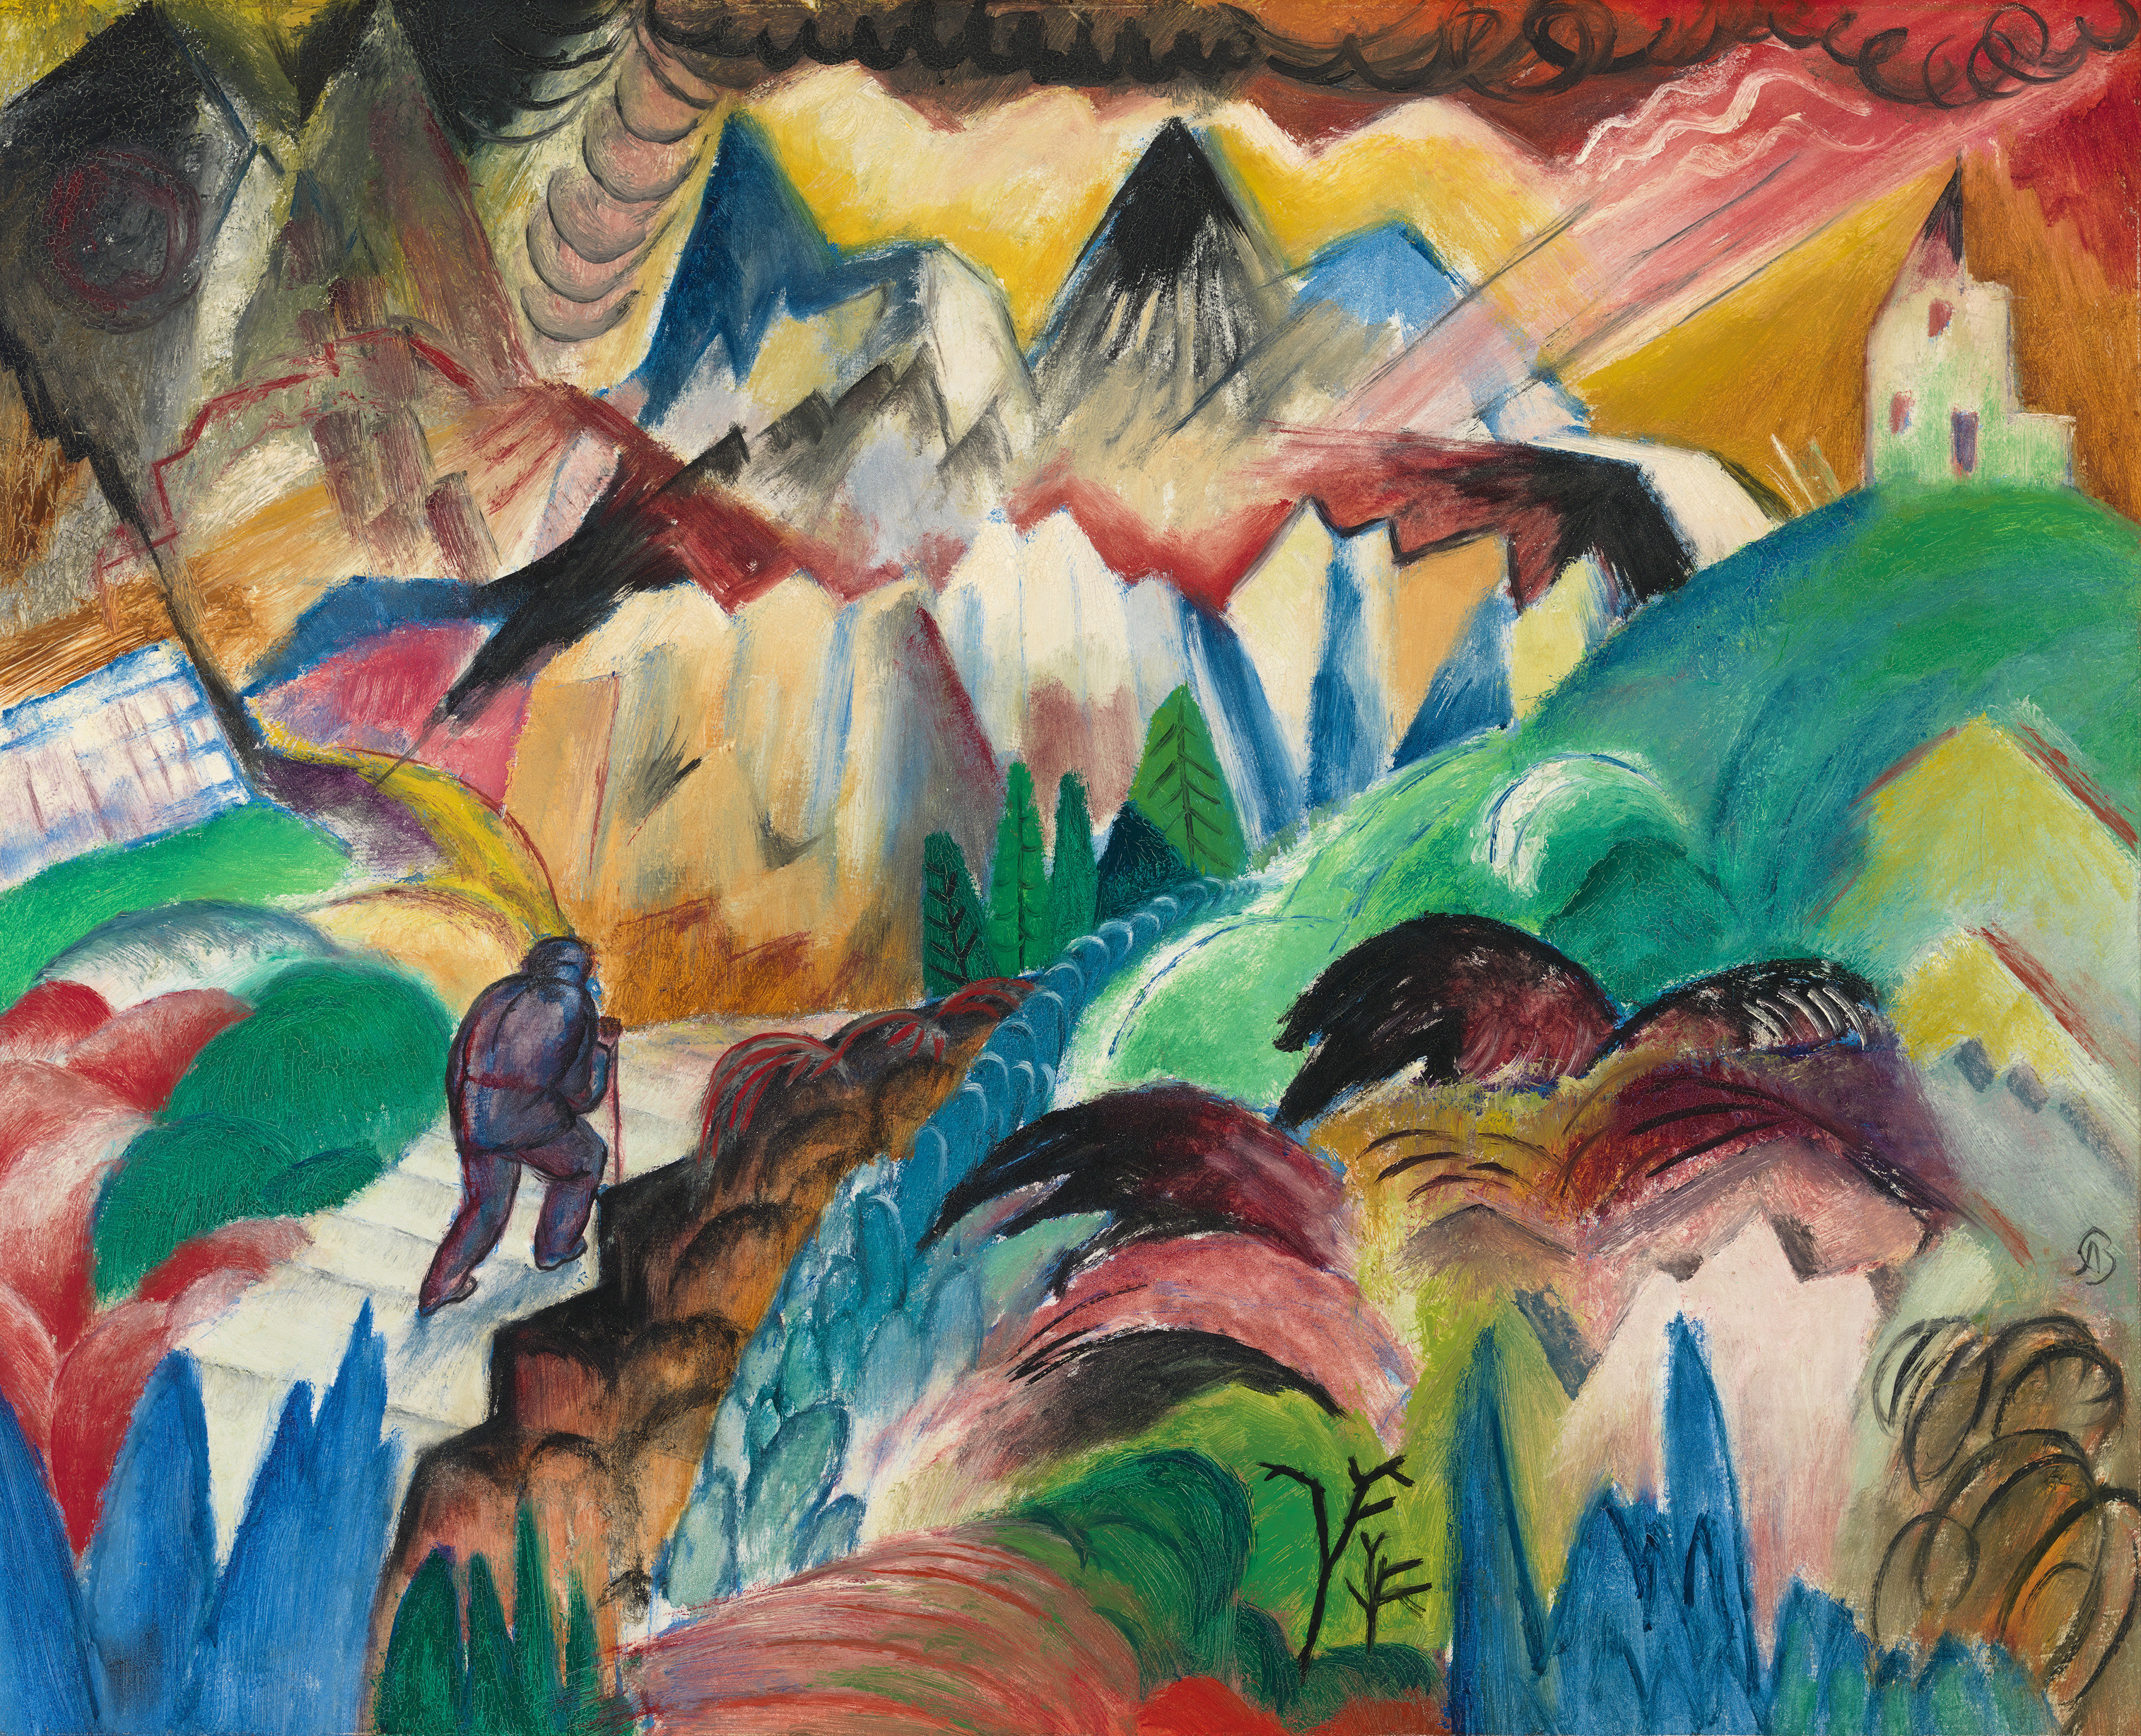 Albert Bloch, Mountain, 1916. Oil on paperboard, 25 1/8 × 31 3/4 in. (63.8 × 80.6 cm). Whitney Museum of American Art, New York; Blanche A. Haberman Bequest 69.40